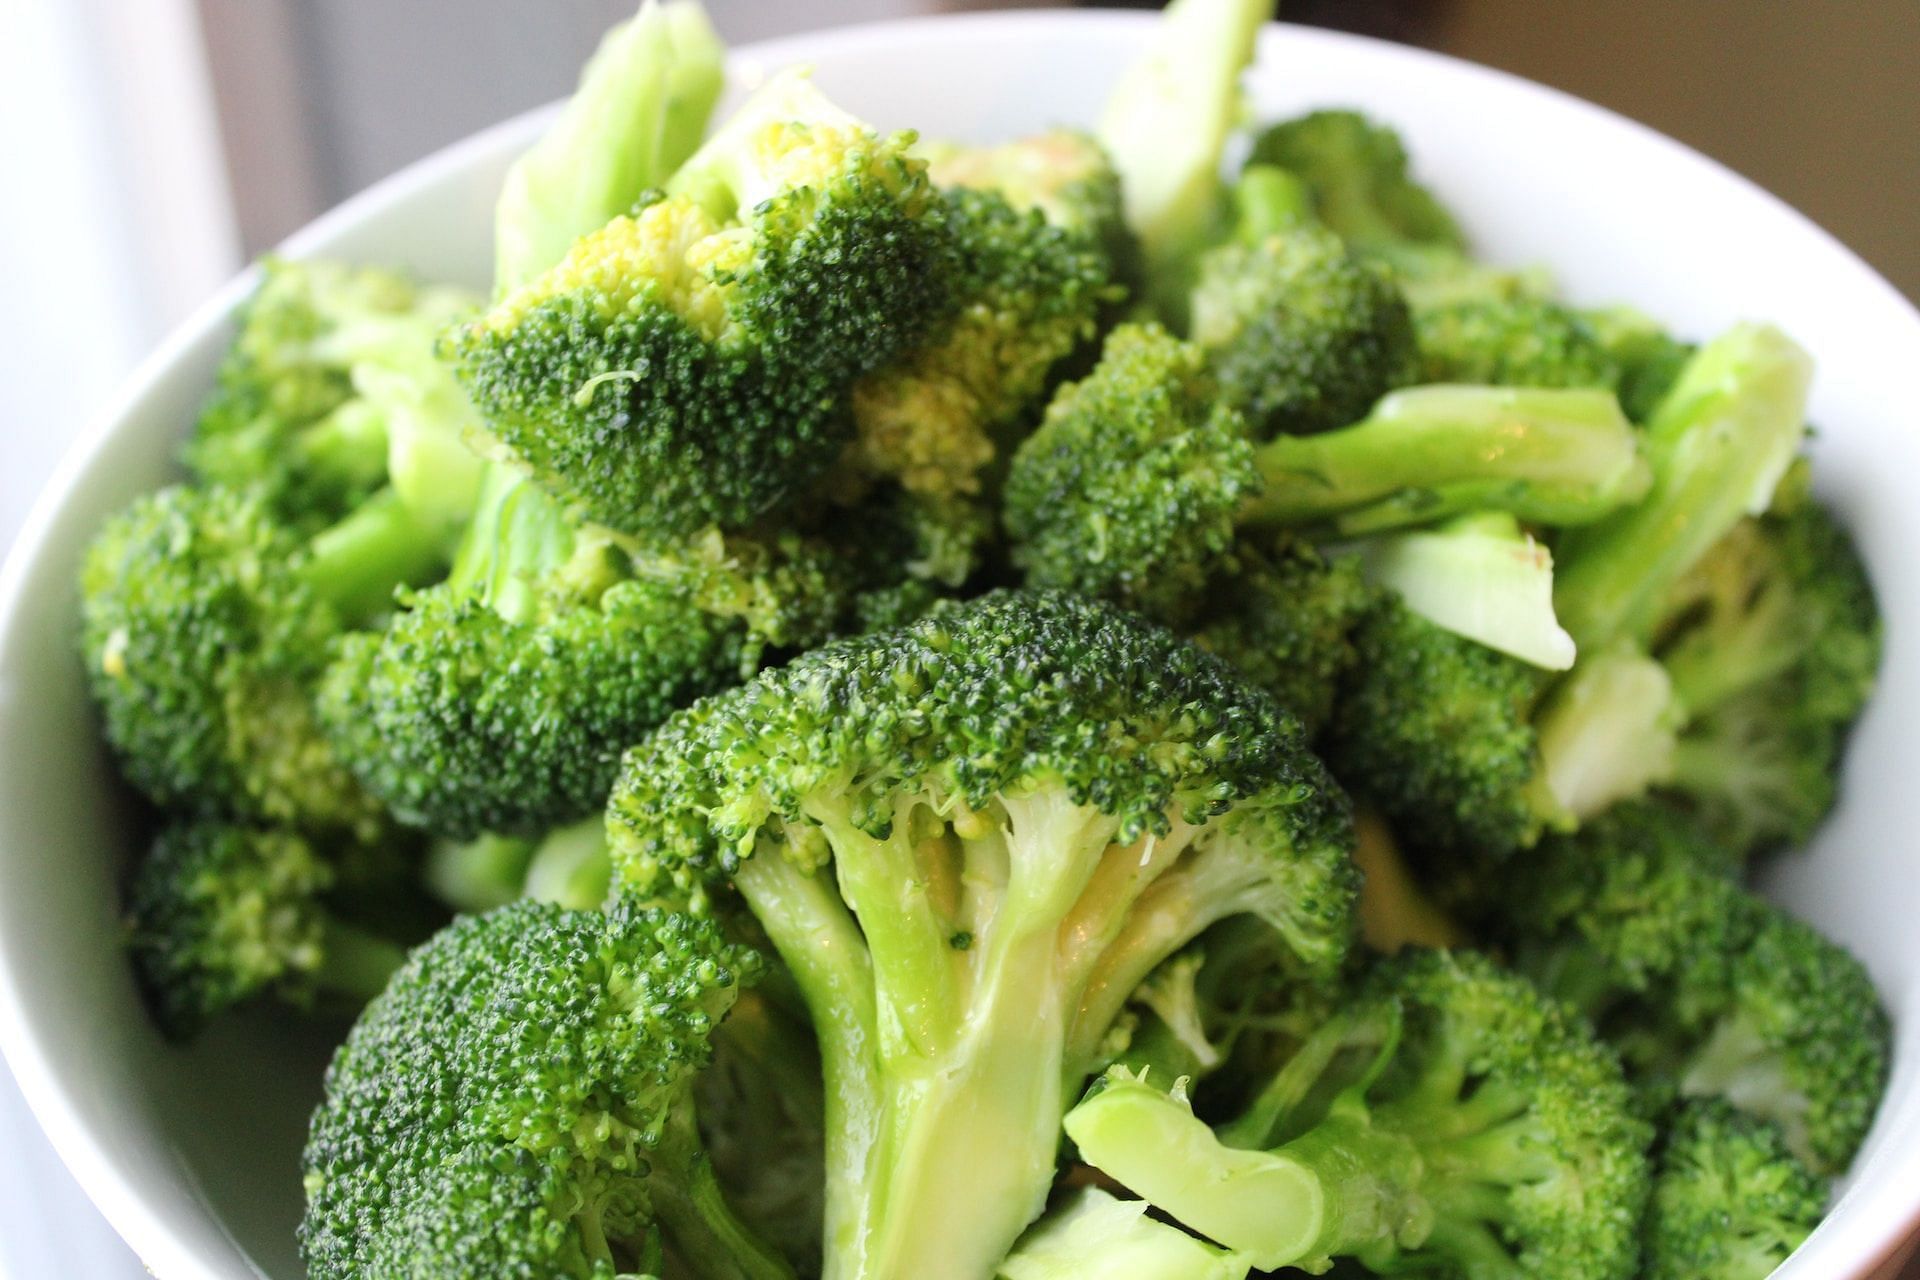 Is Broccoli Bad for You? Side Effects of Broccoli. (Image credits: Unsplash/ Tyrell Fitness and Nutrition)